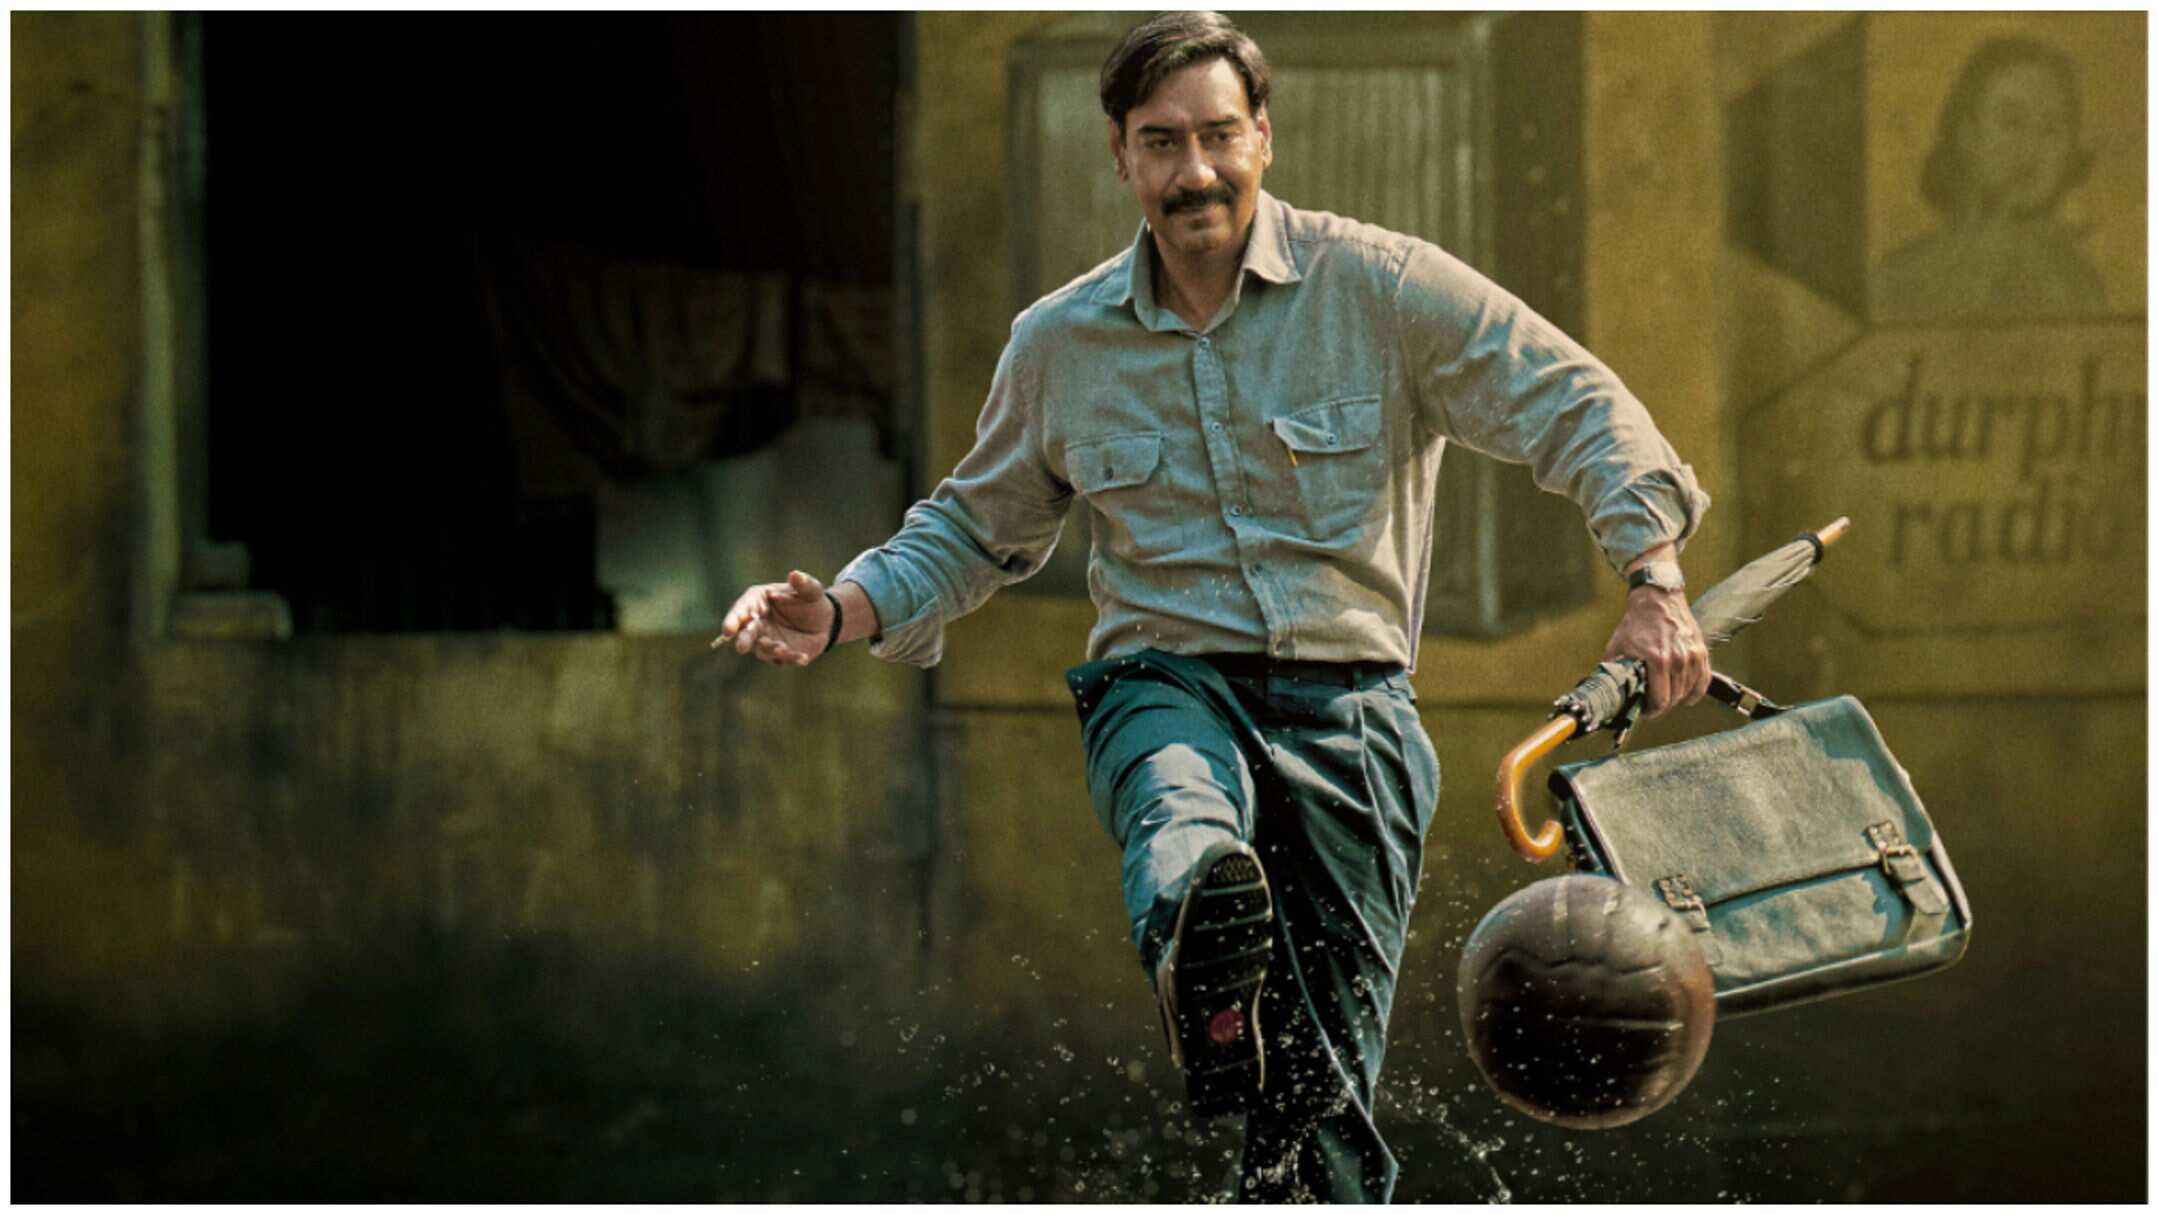 https://www.mobilemasala.com/movies/Maidaan-on-OTT---Where-to-watch-Ajay-Devgns-sports-drama-after-its-theatrical-run-i252106